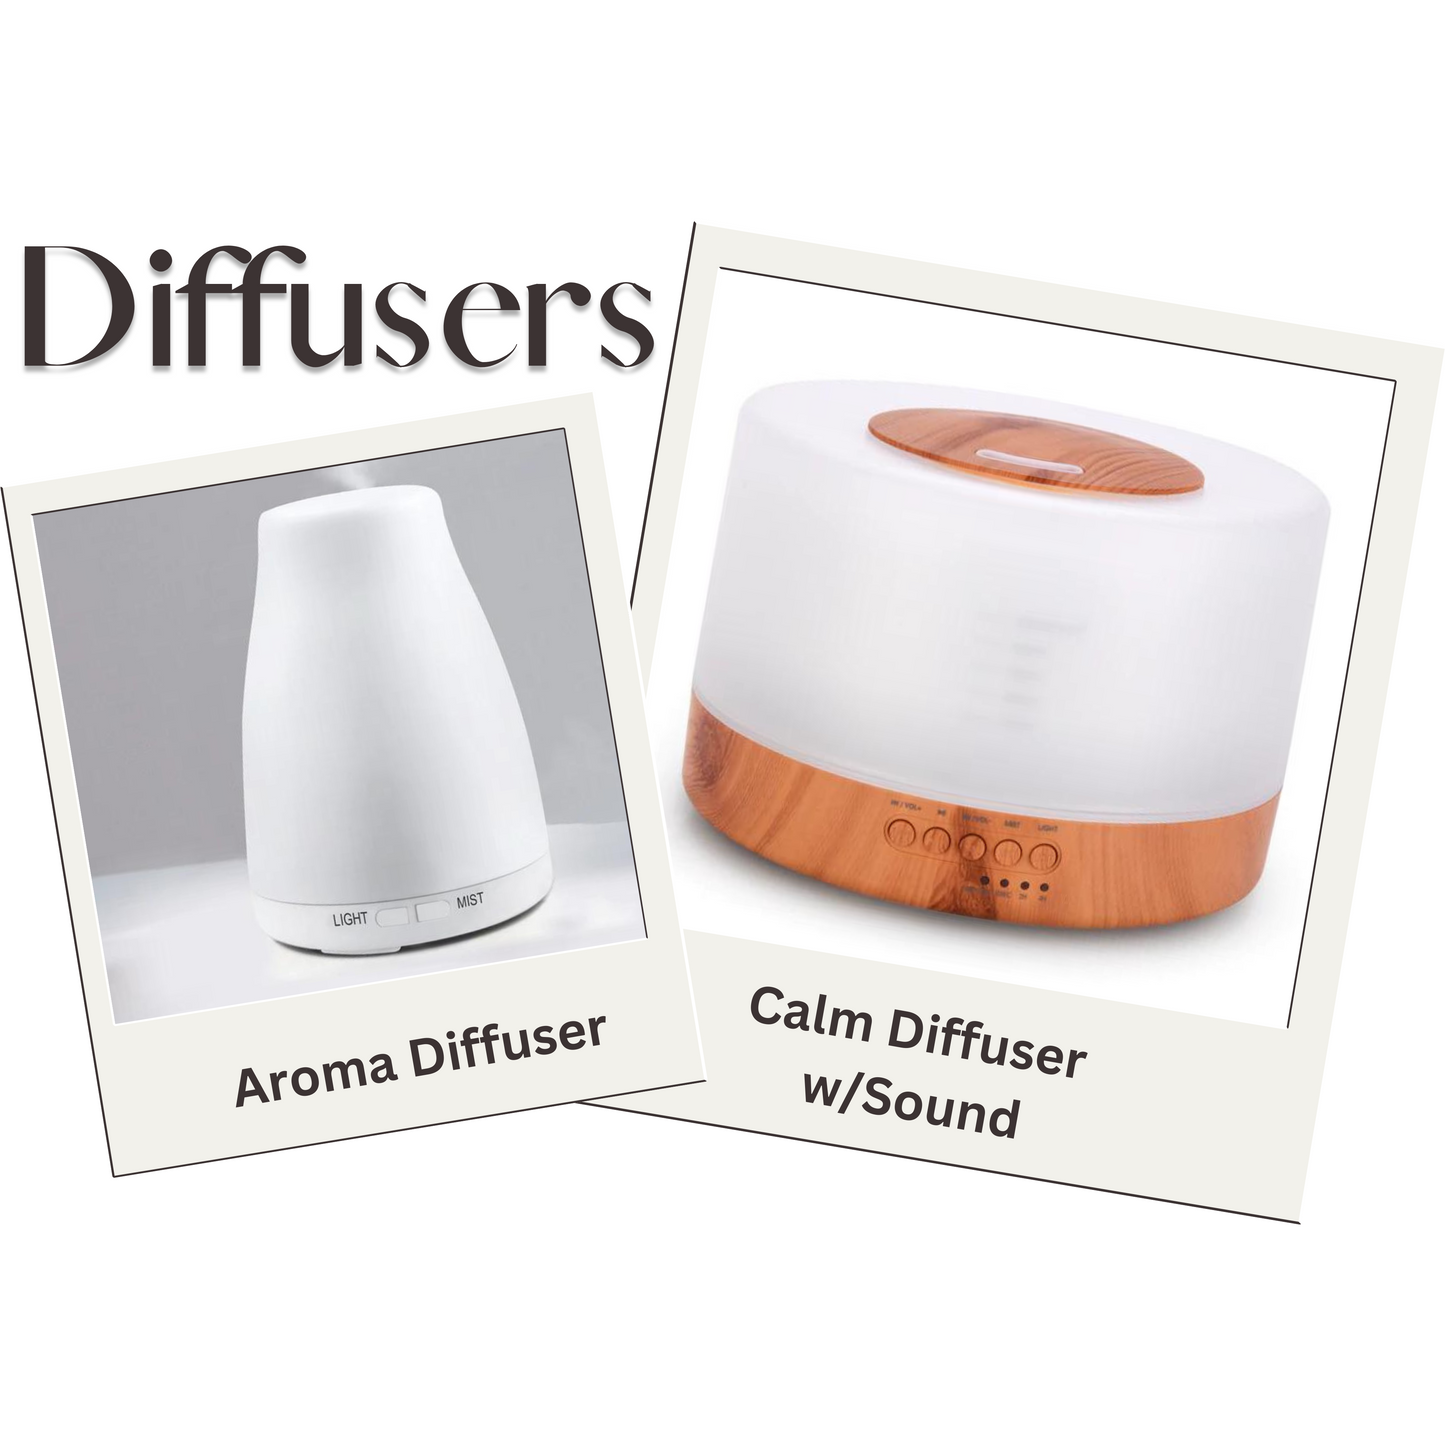 Diffuser Features: Utilizes ultrasonic technology to release aroma by atomizing water and essential oil Helps to humidify your environment Quiet to help promote a restful sleep Features continuous mist or auto-off timer